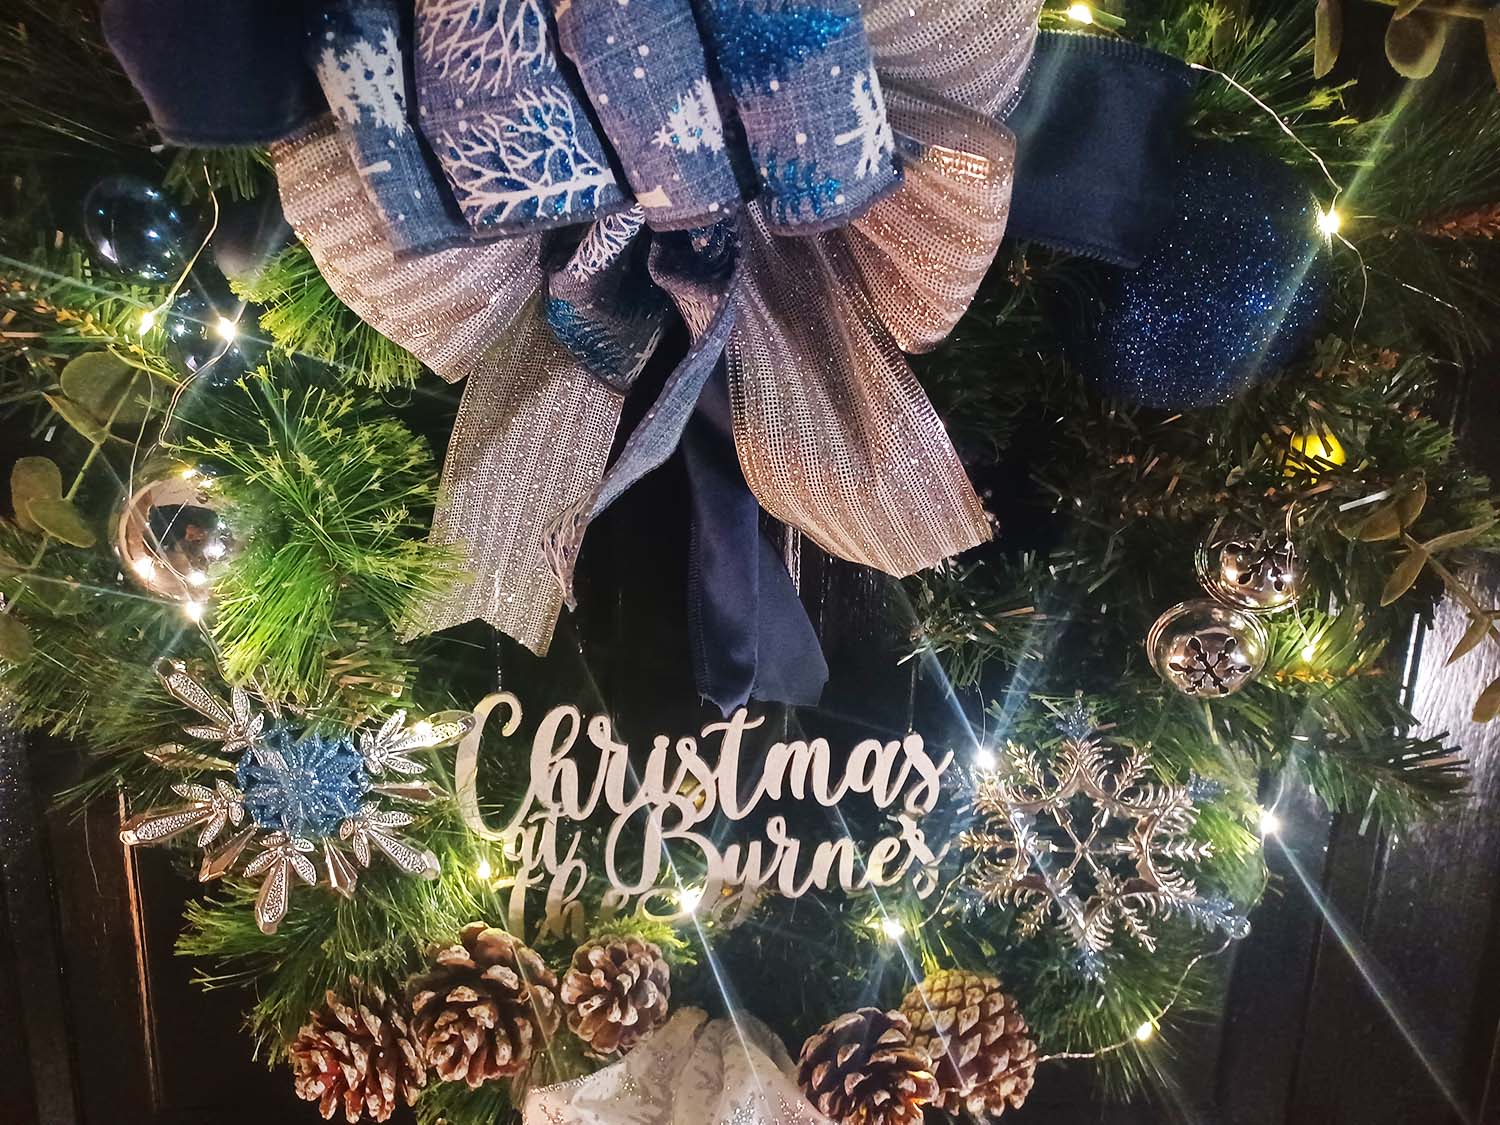 Personalised Sign for Christmas Wreath Ireland Dublin